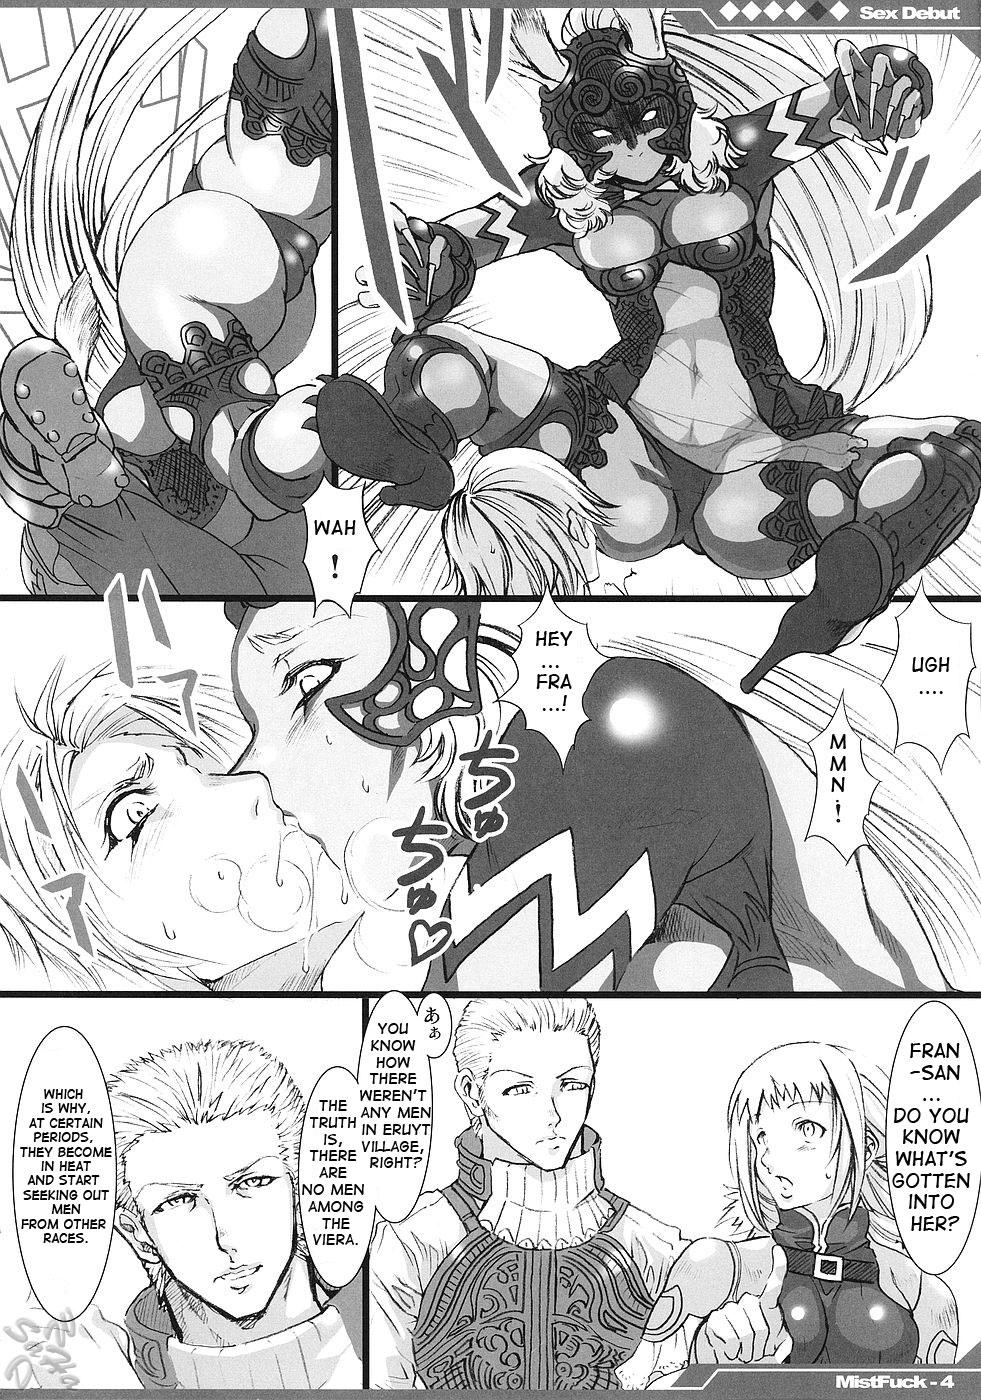 Ametuer Porn Kyou Kara Fuuzoku Debut | Today's the Debut of Sex Service - Final fantasy xii Whatsapp - Page 5